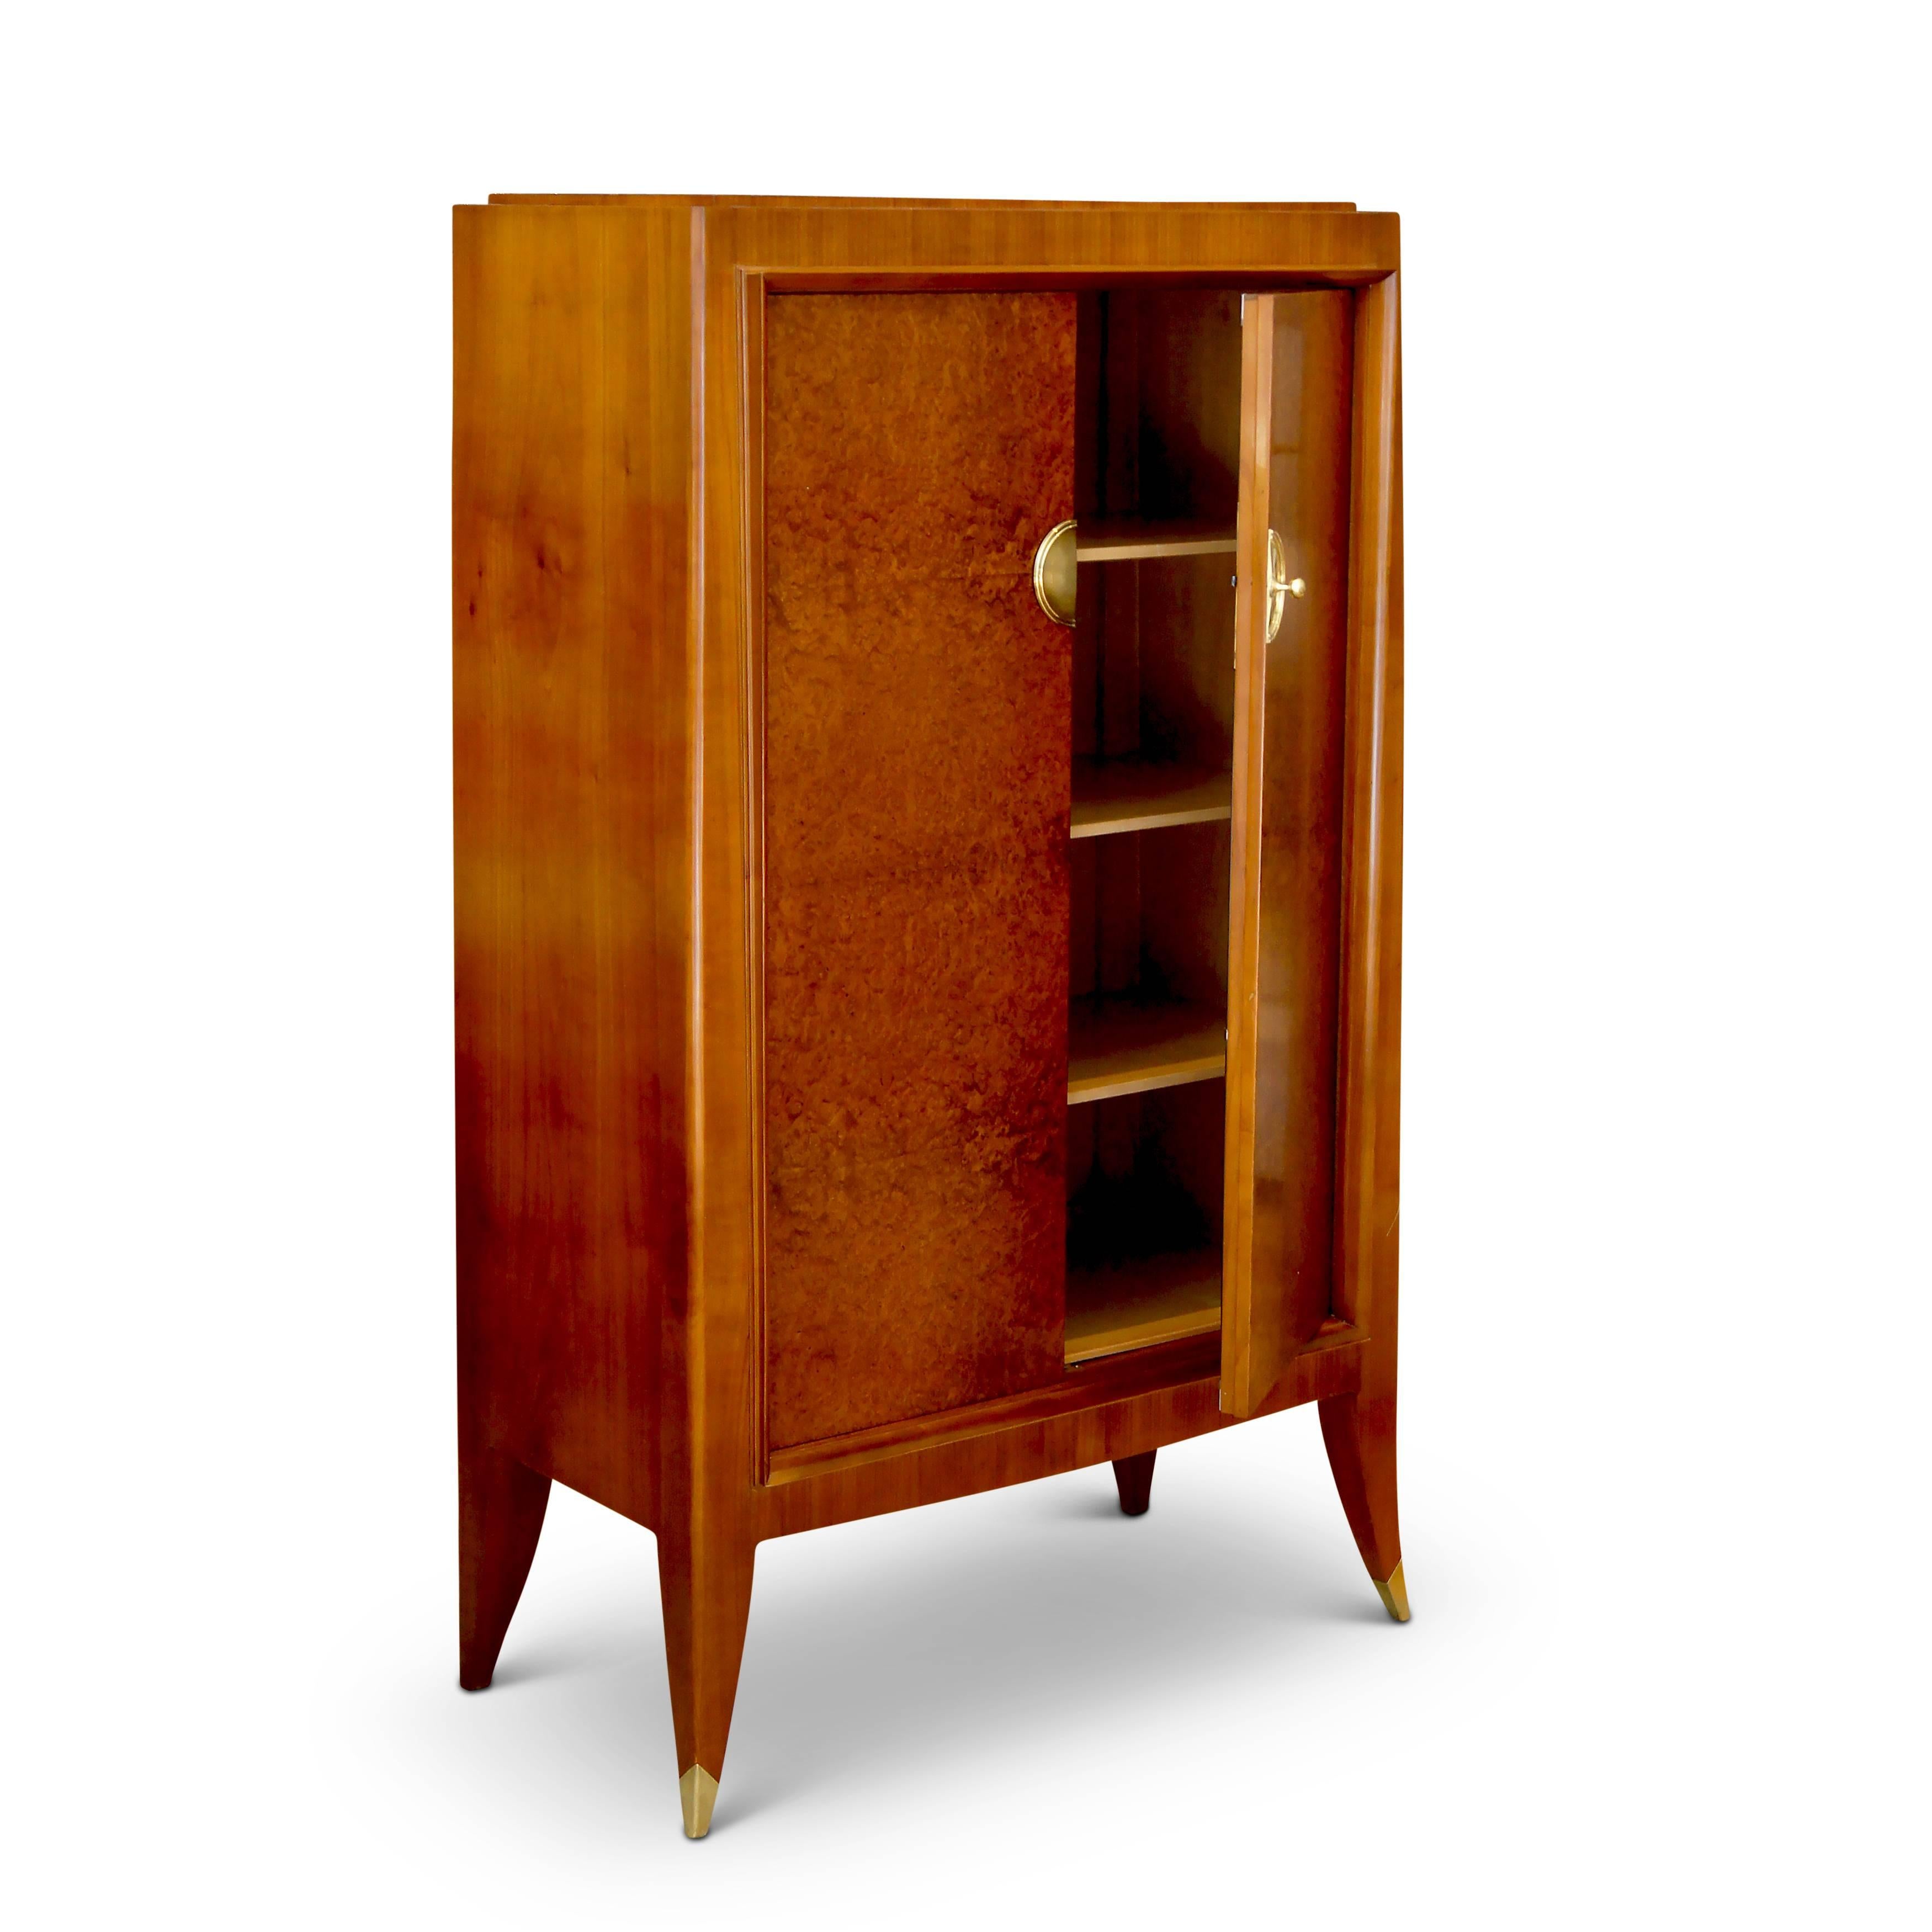 Fine cabinet (forming an original custom set with a storage cabinet, also available) by Alfred Porteneuve (1869-1949). The sculptural case-piece is superlatively crafted in fruitwood (likely cherry) with amboyna (burl walnut) veneer on the doors. A